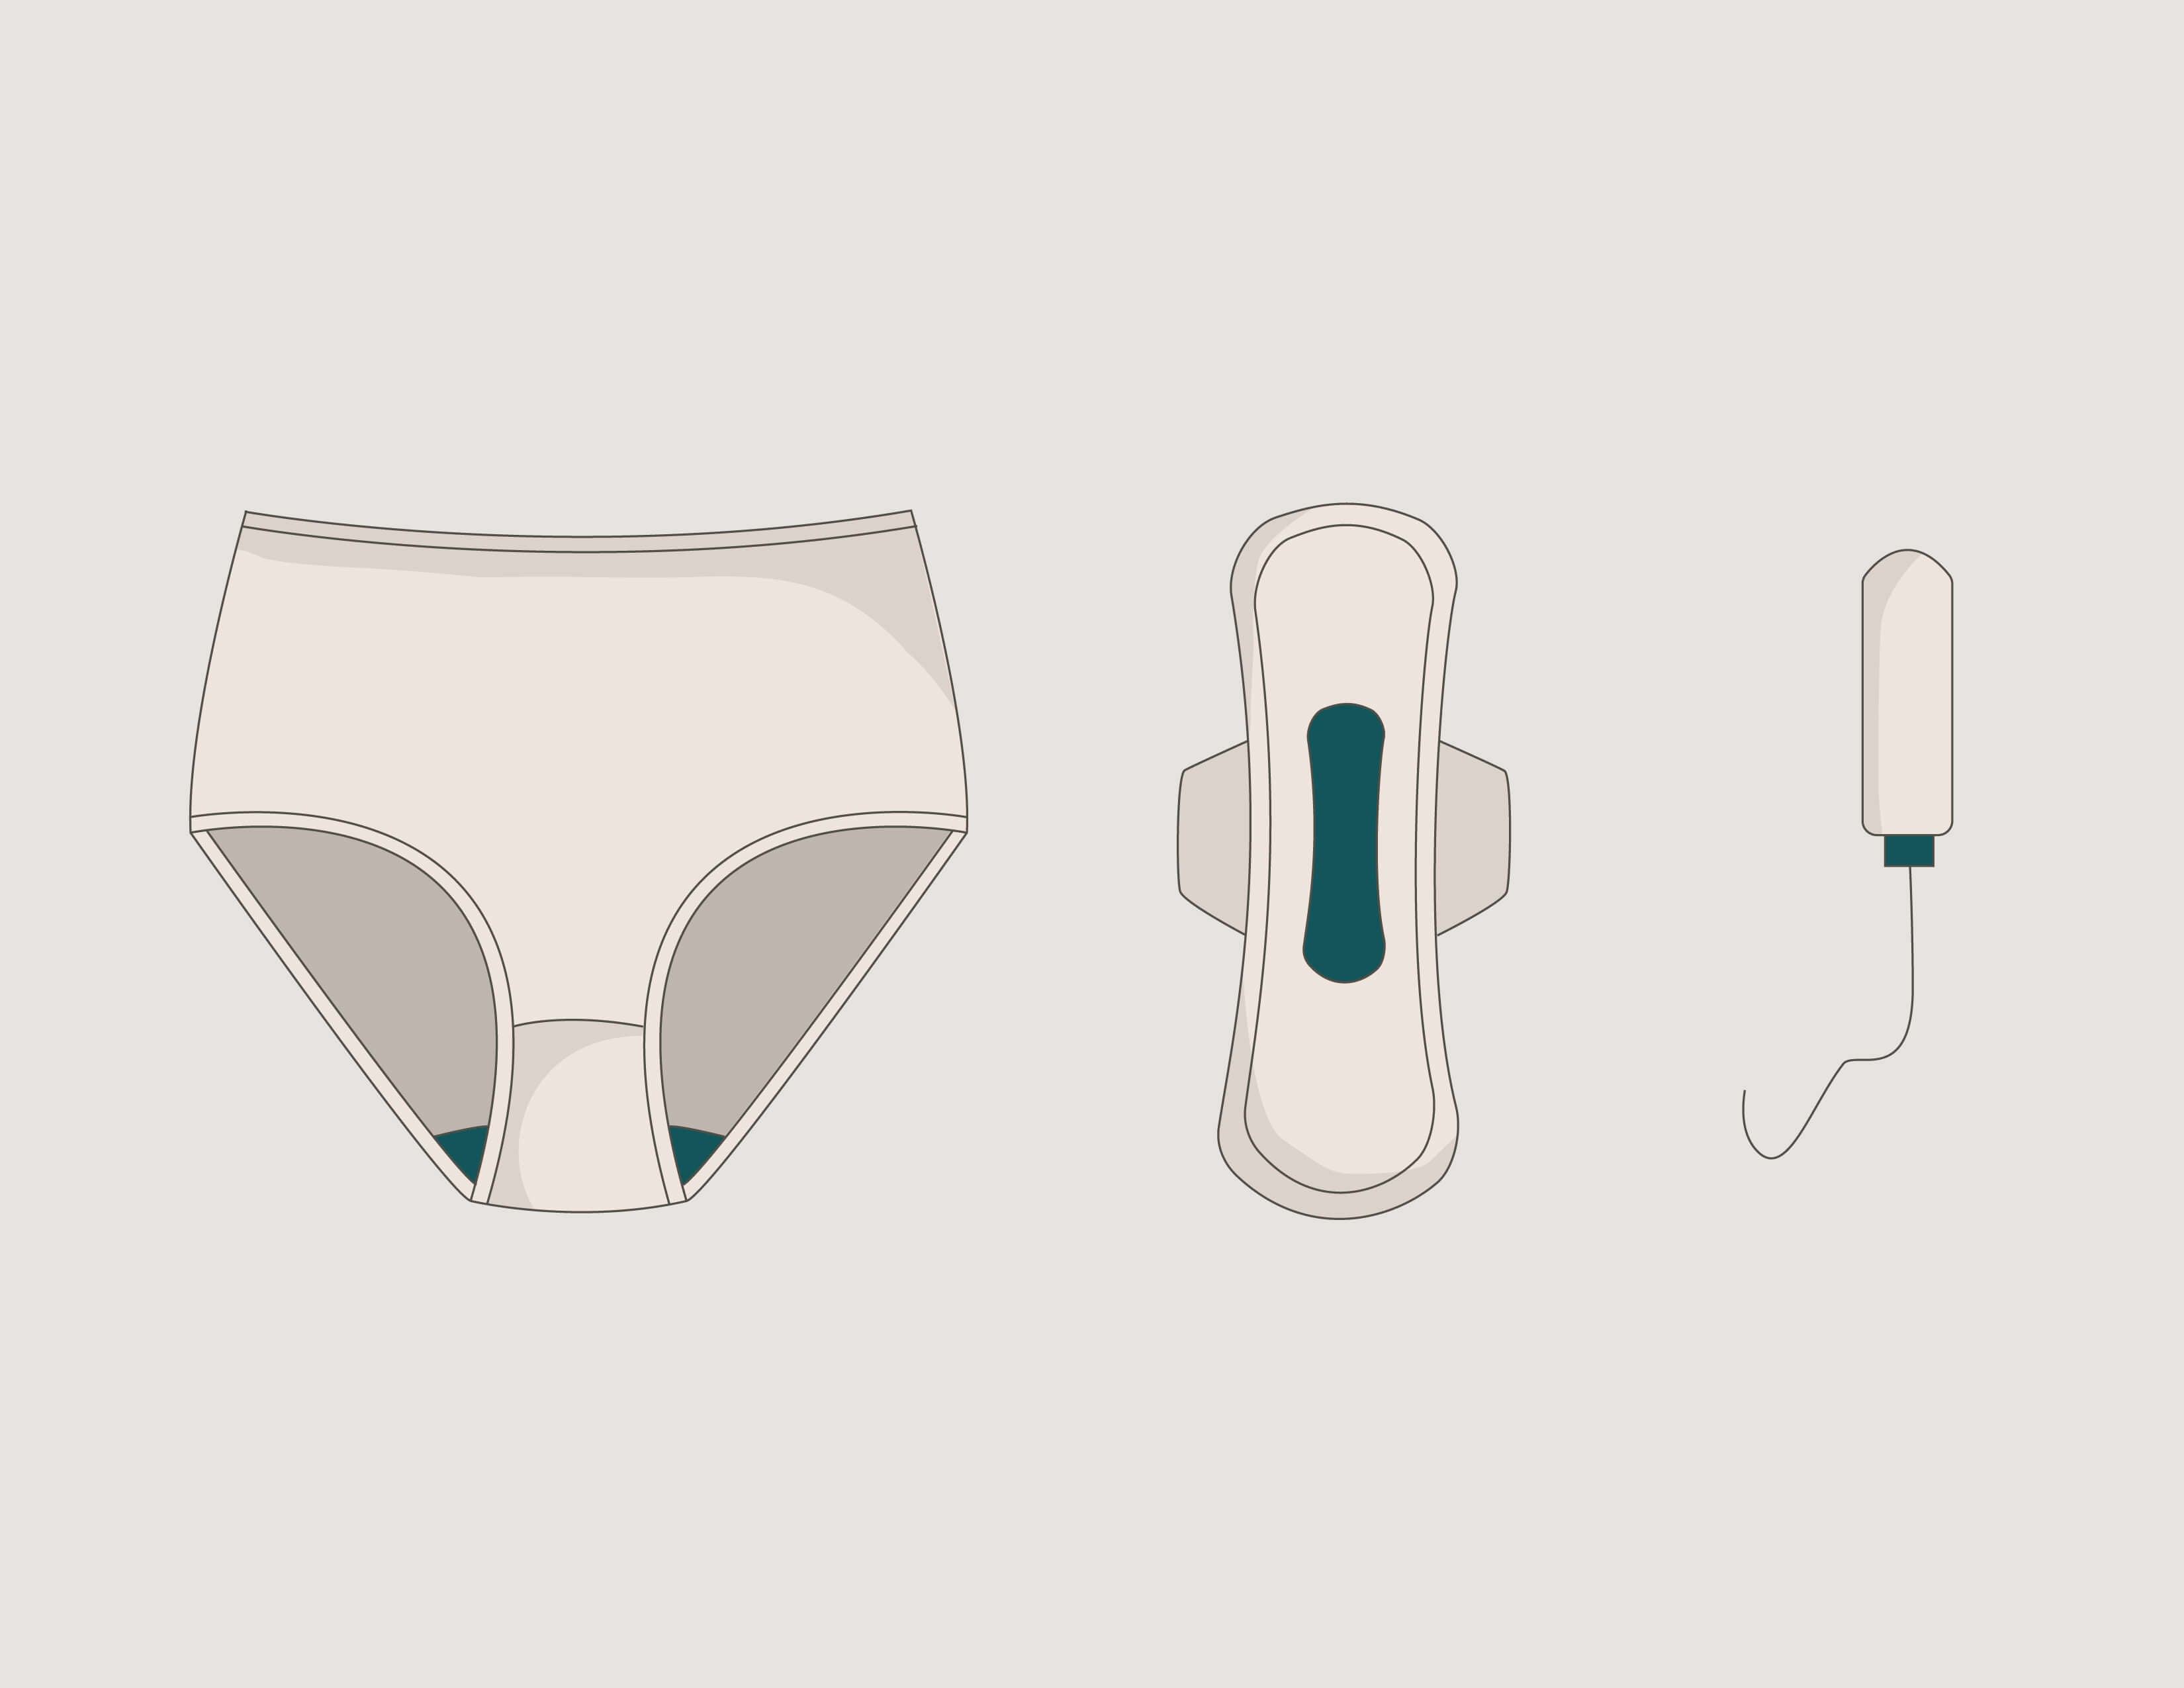 5 types of underwear every girl must have - Her World Singapore